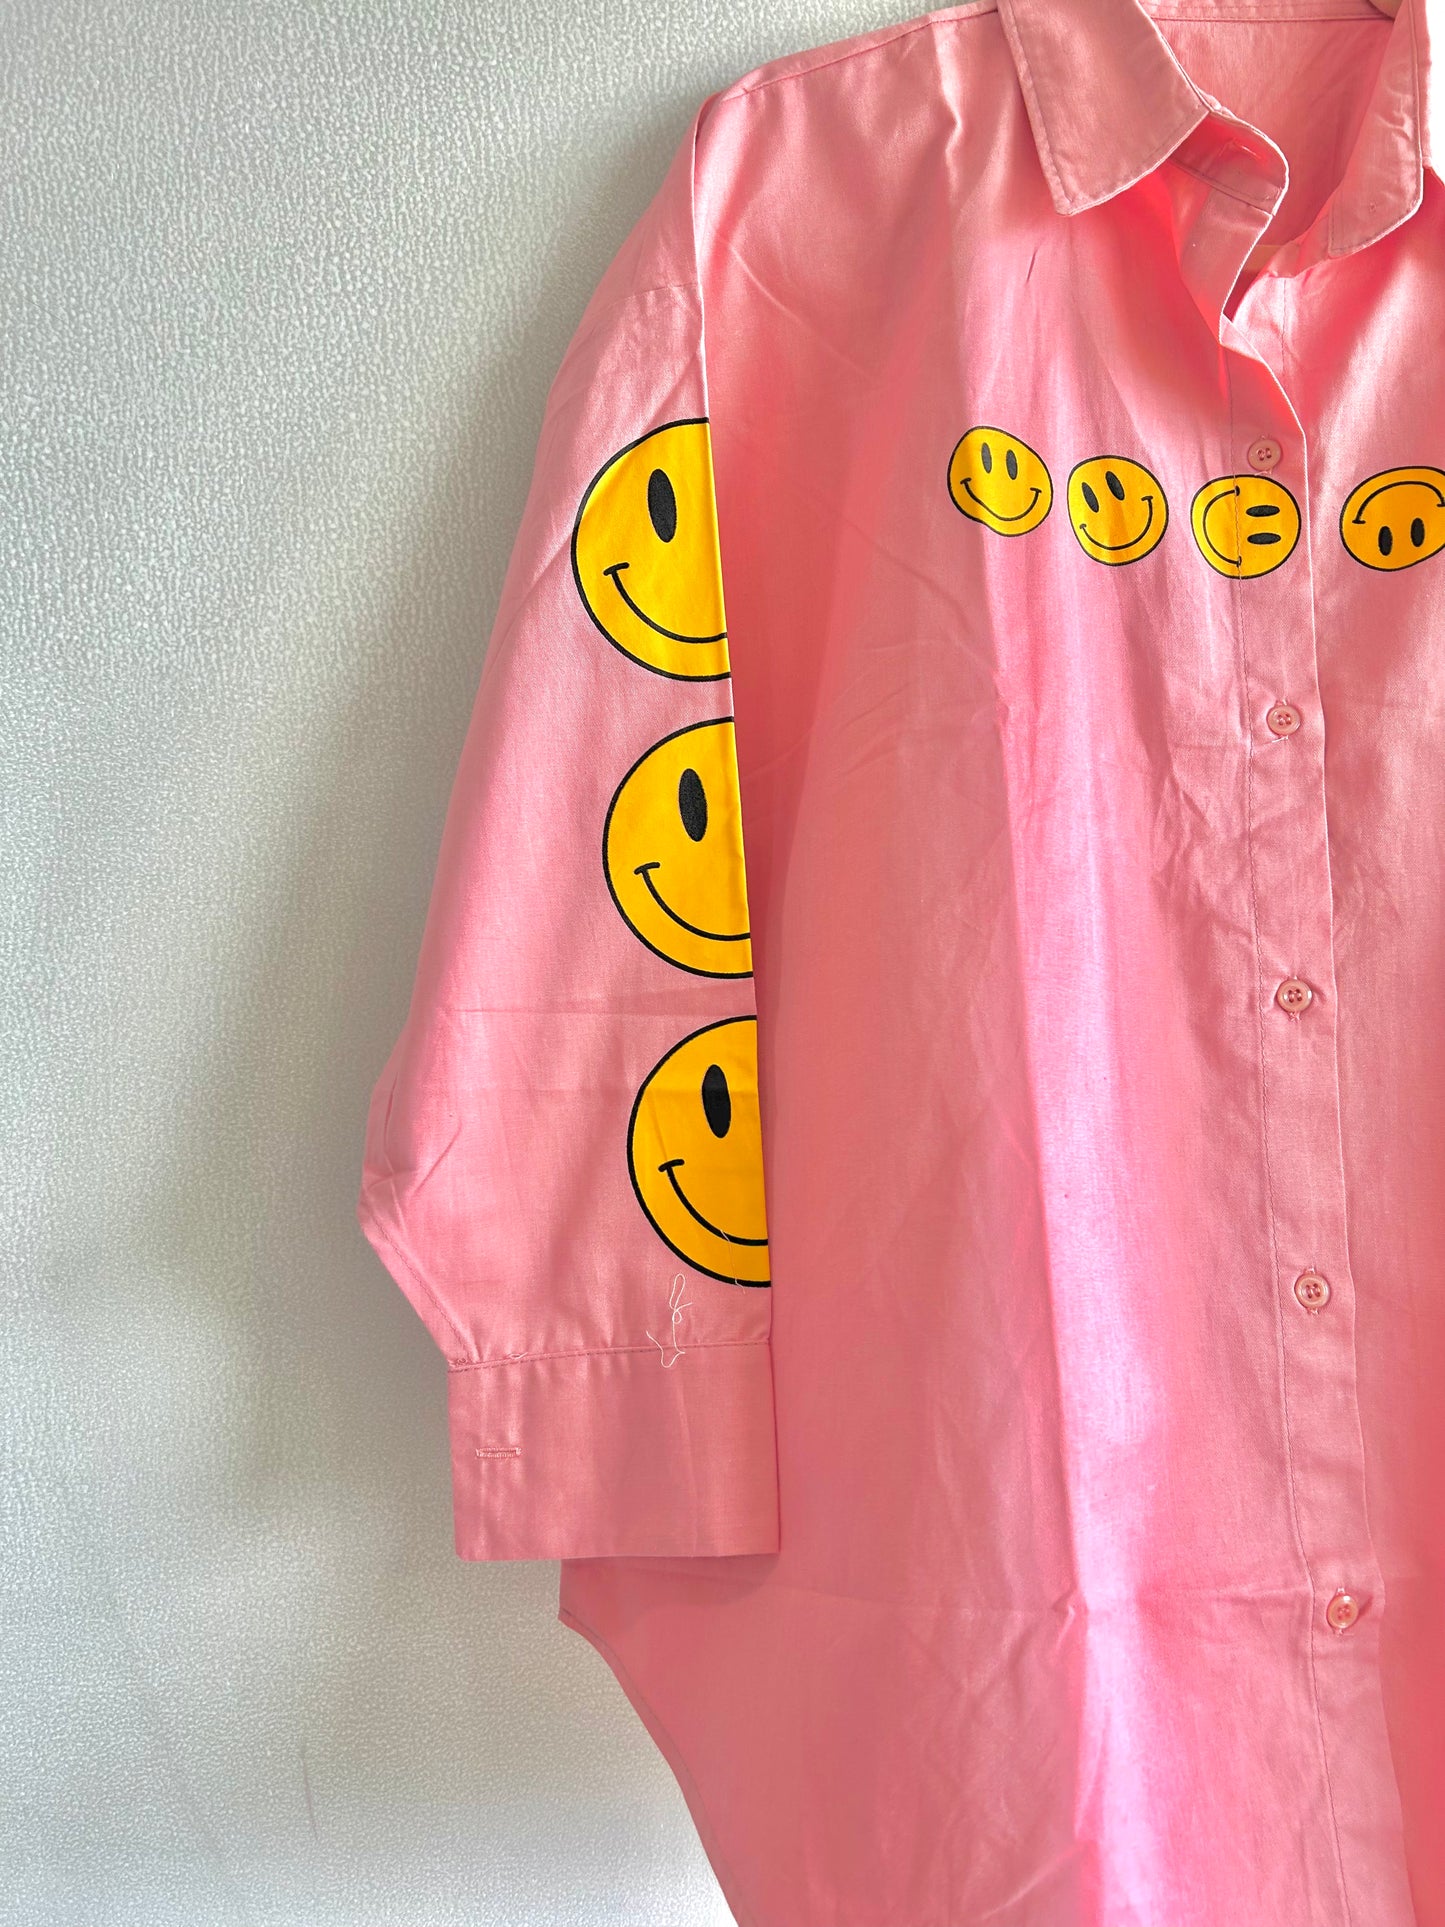 Oversize Style Shirt small smiley PINk